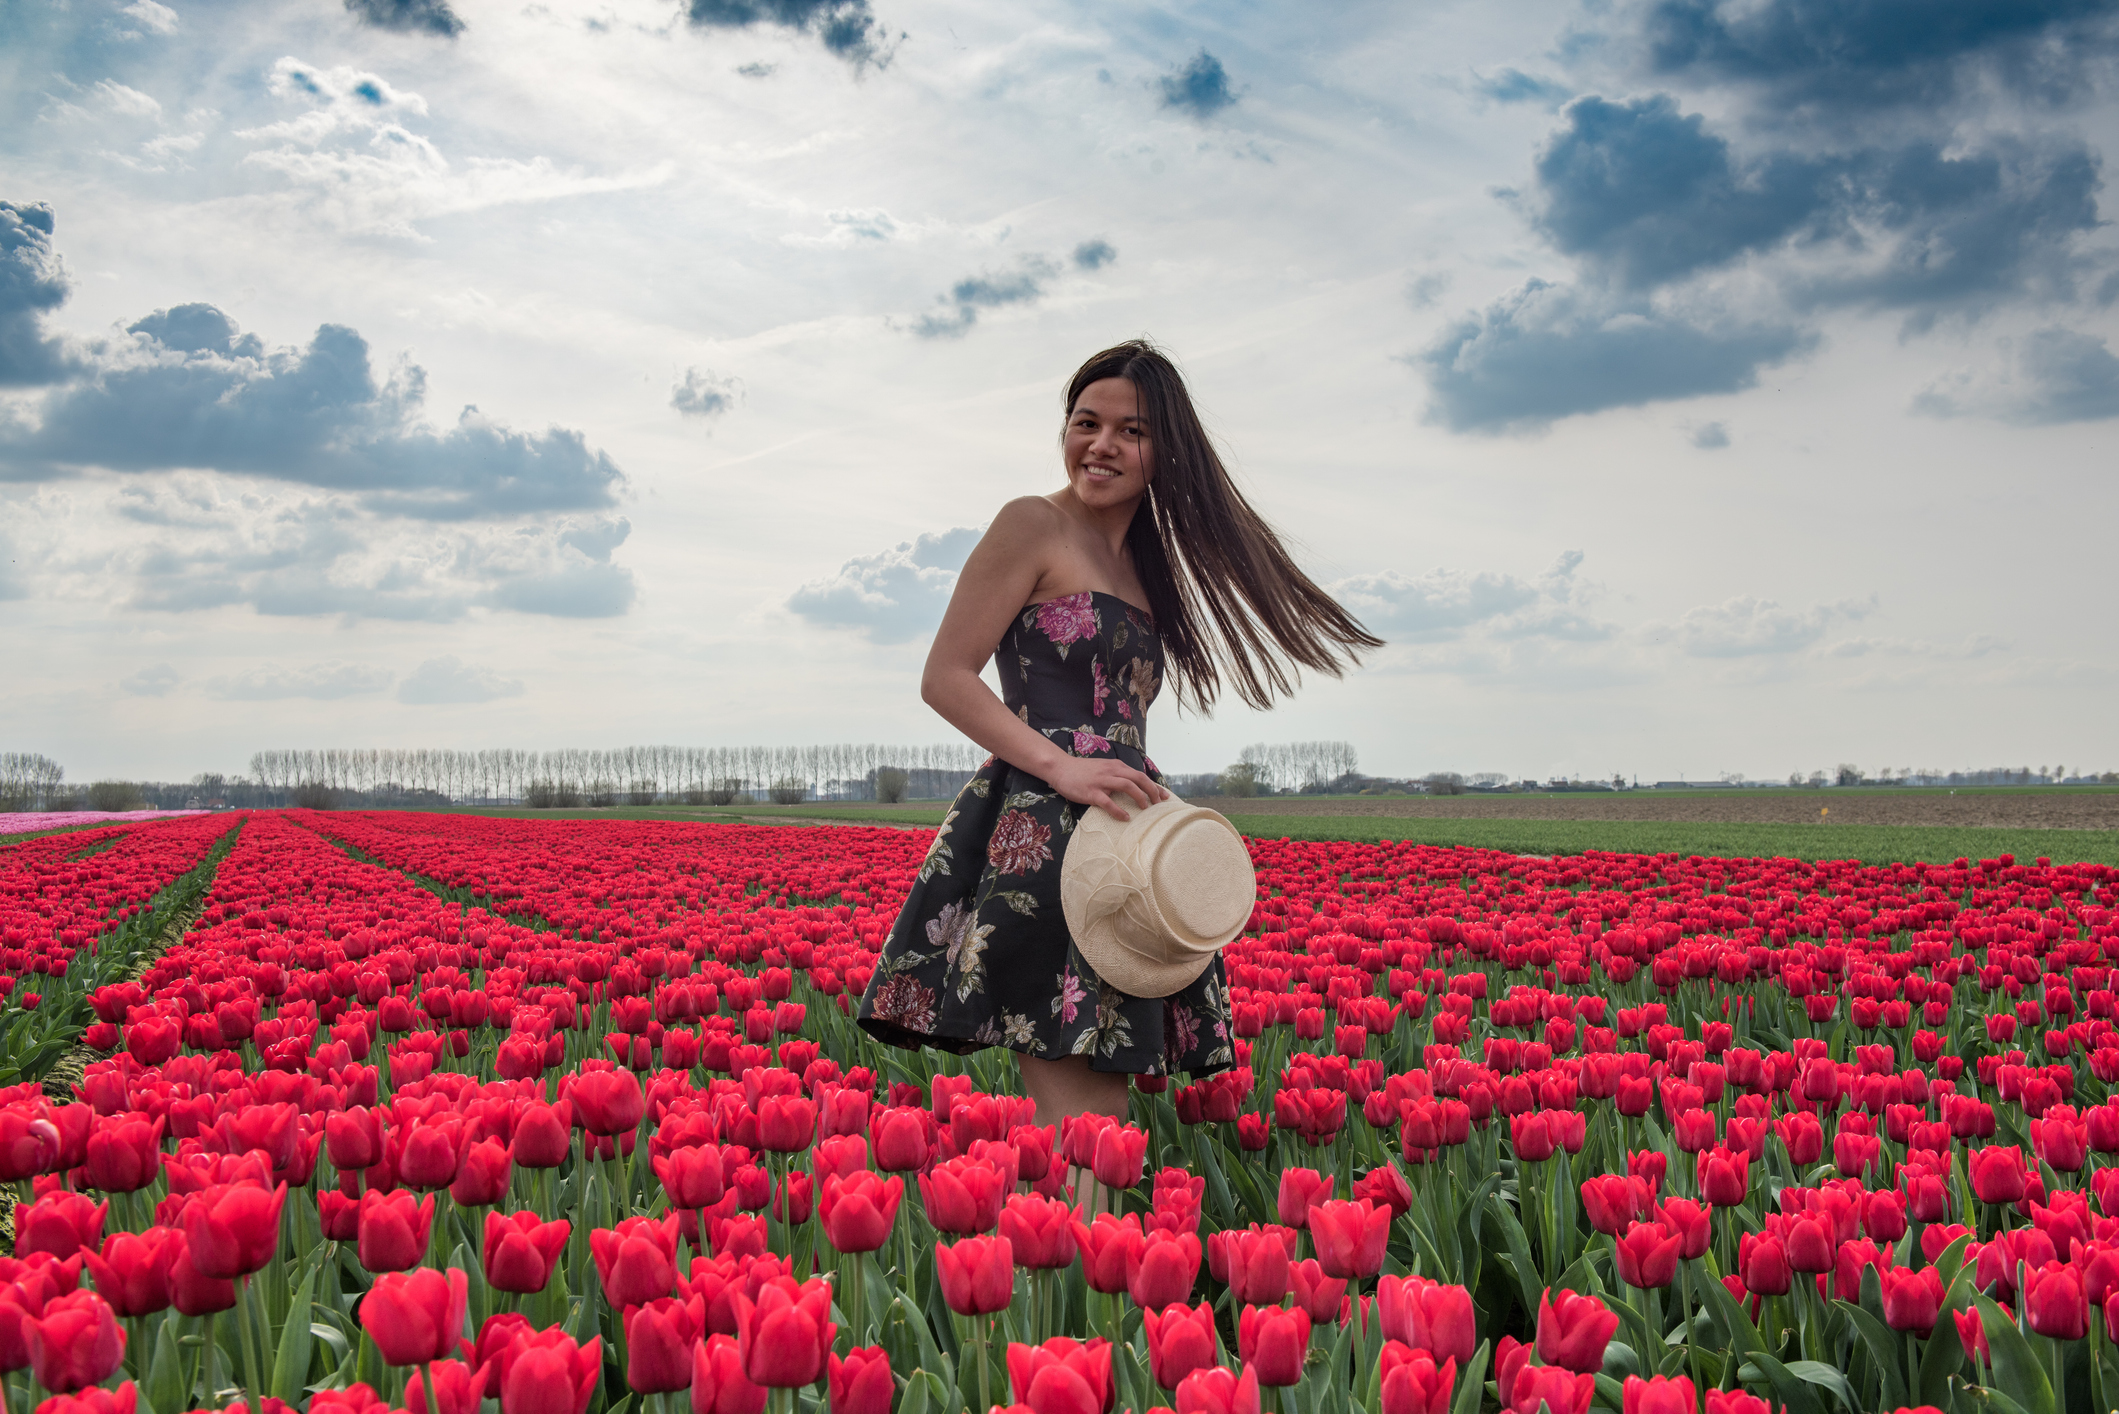 Pretty woman standing in a field of red tulips